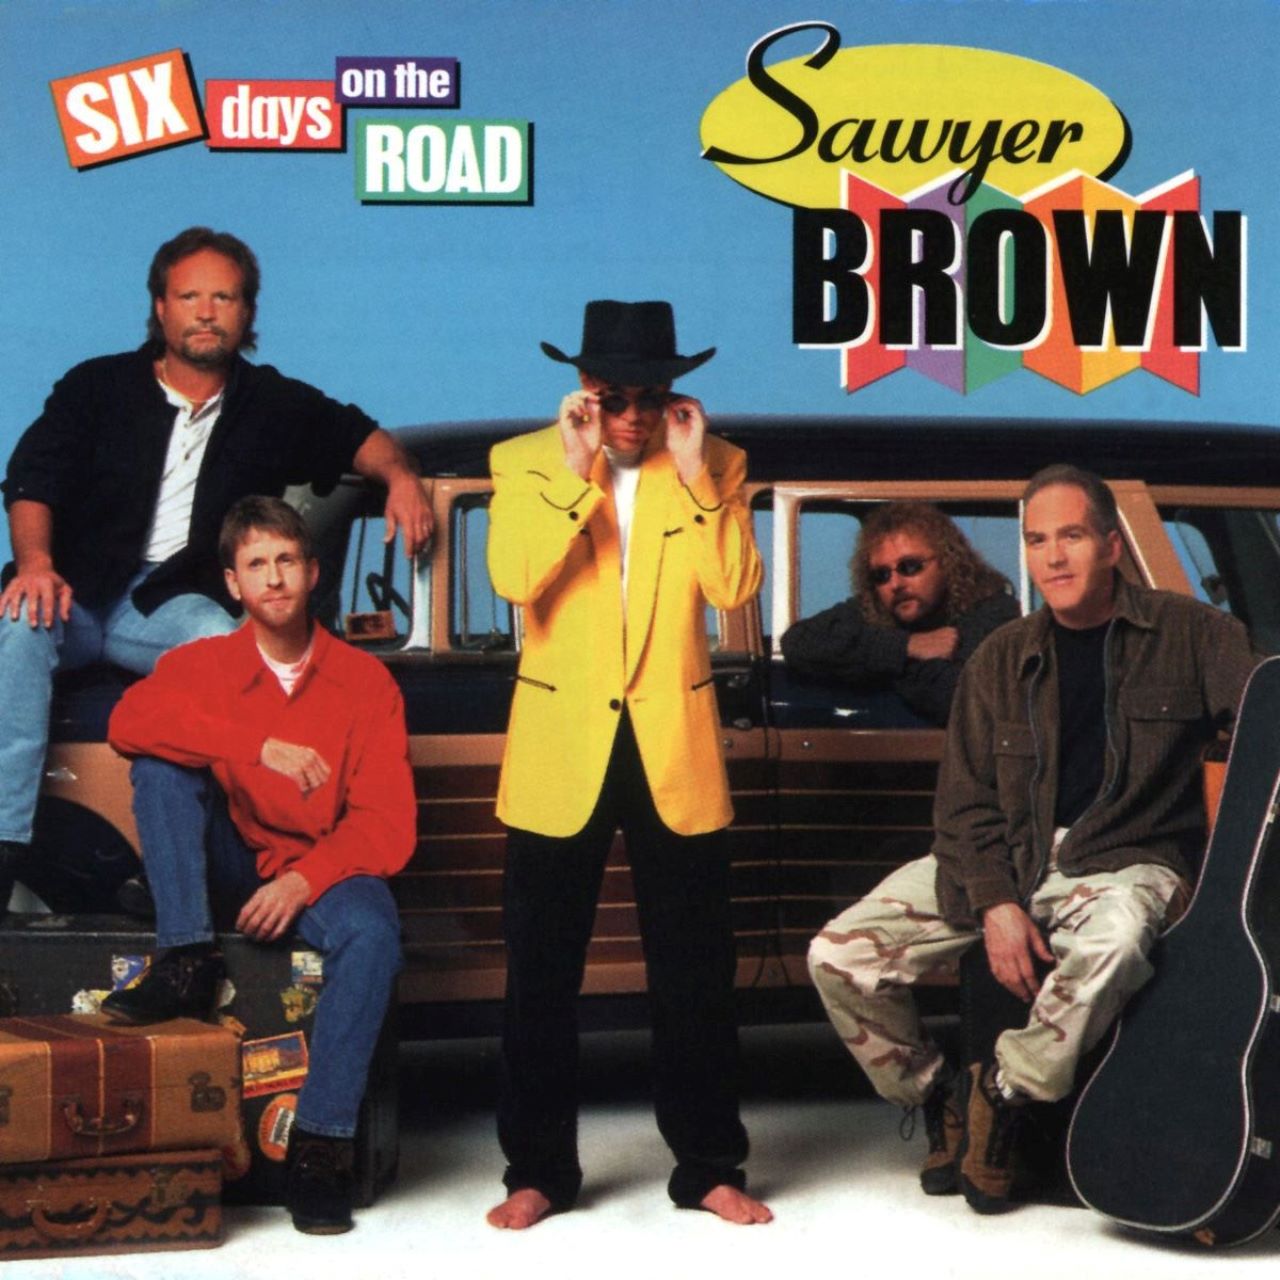 Sawyer Brown - Six Days On The Road cover album